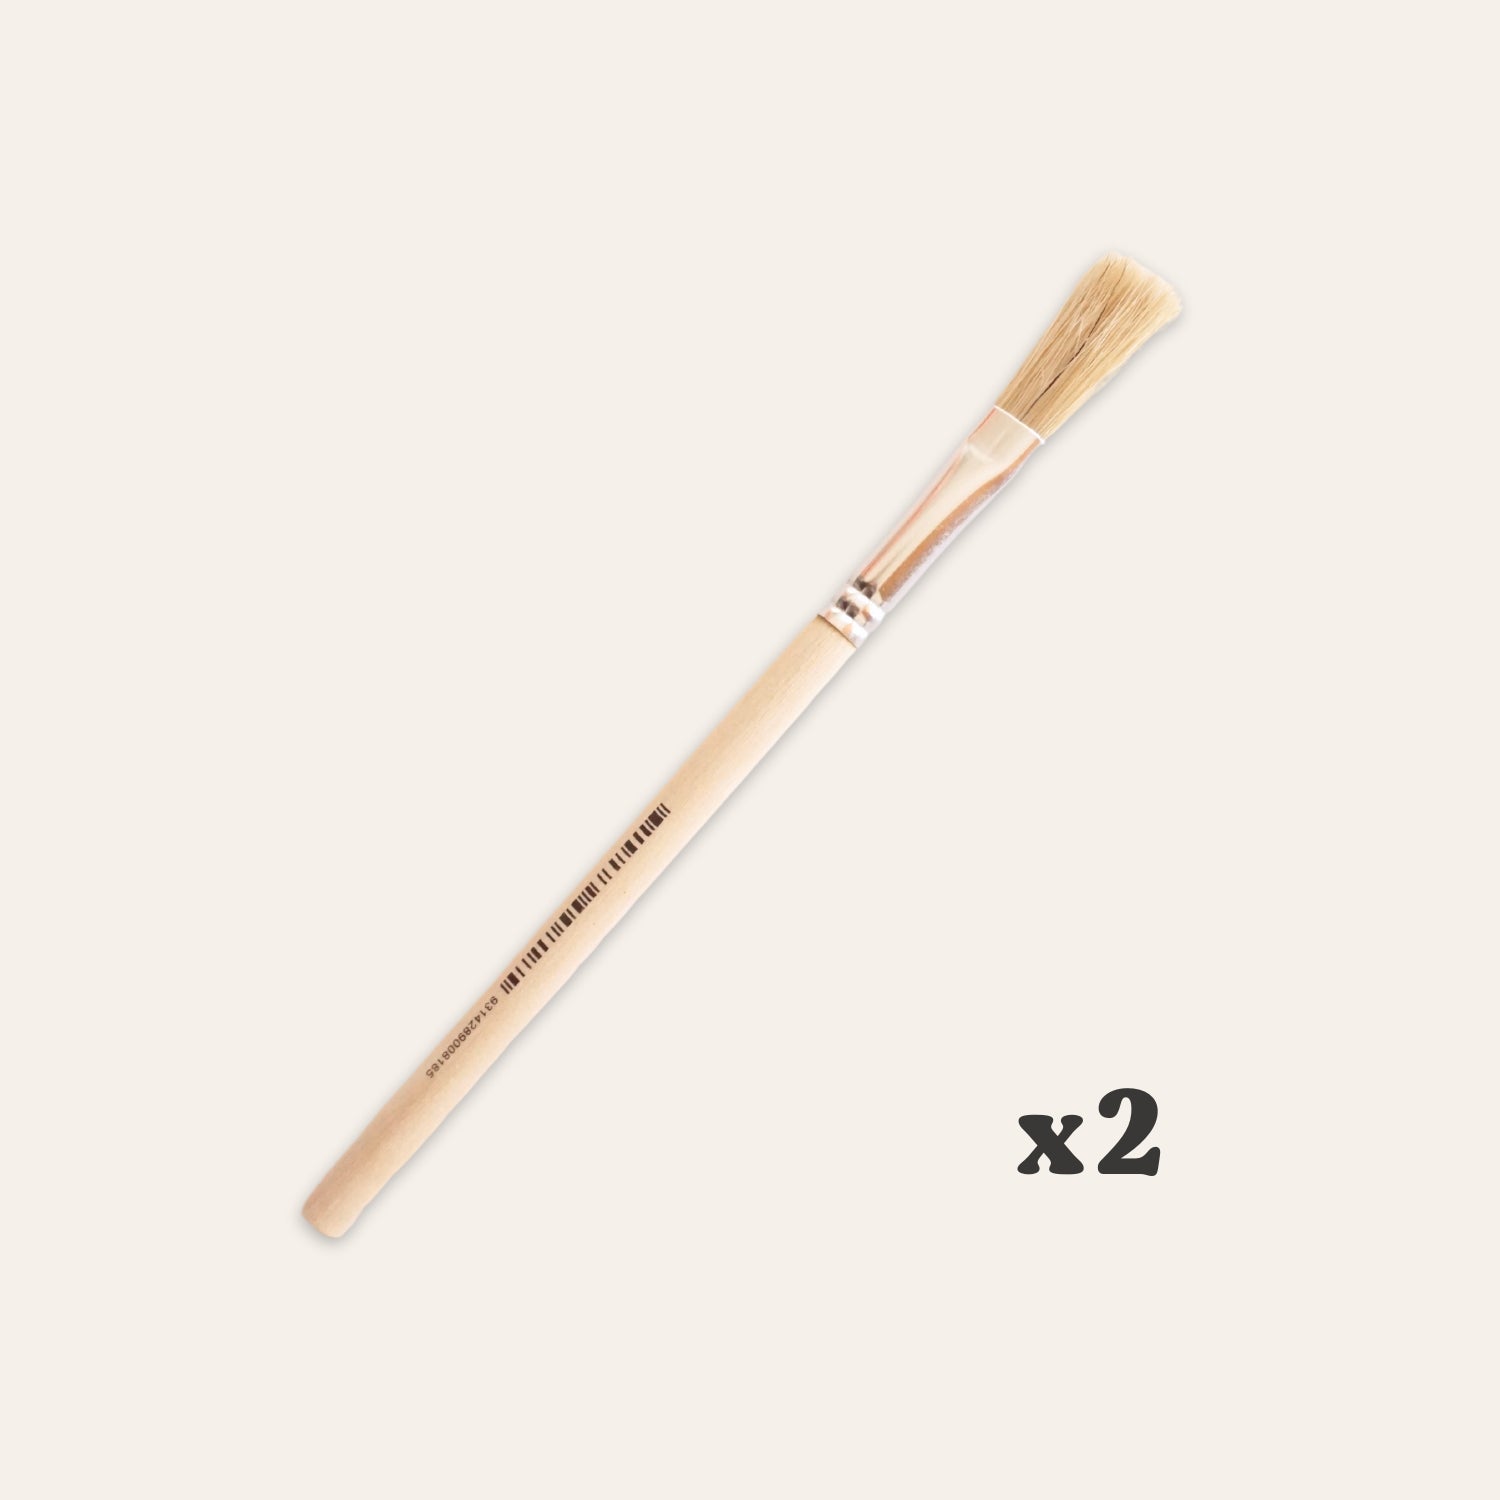 Each clay kit comes with 2x paintbrushes. 